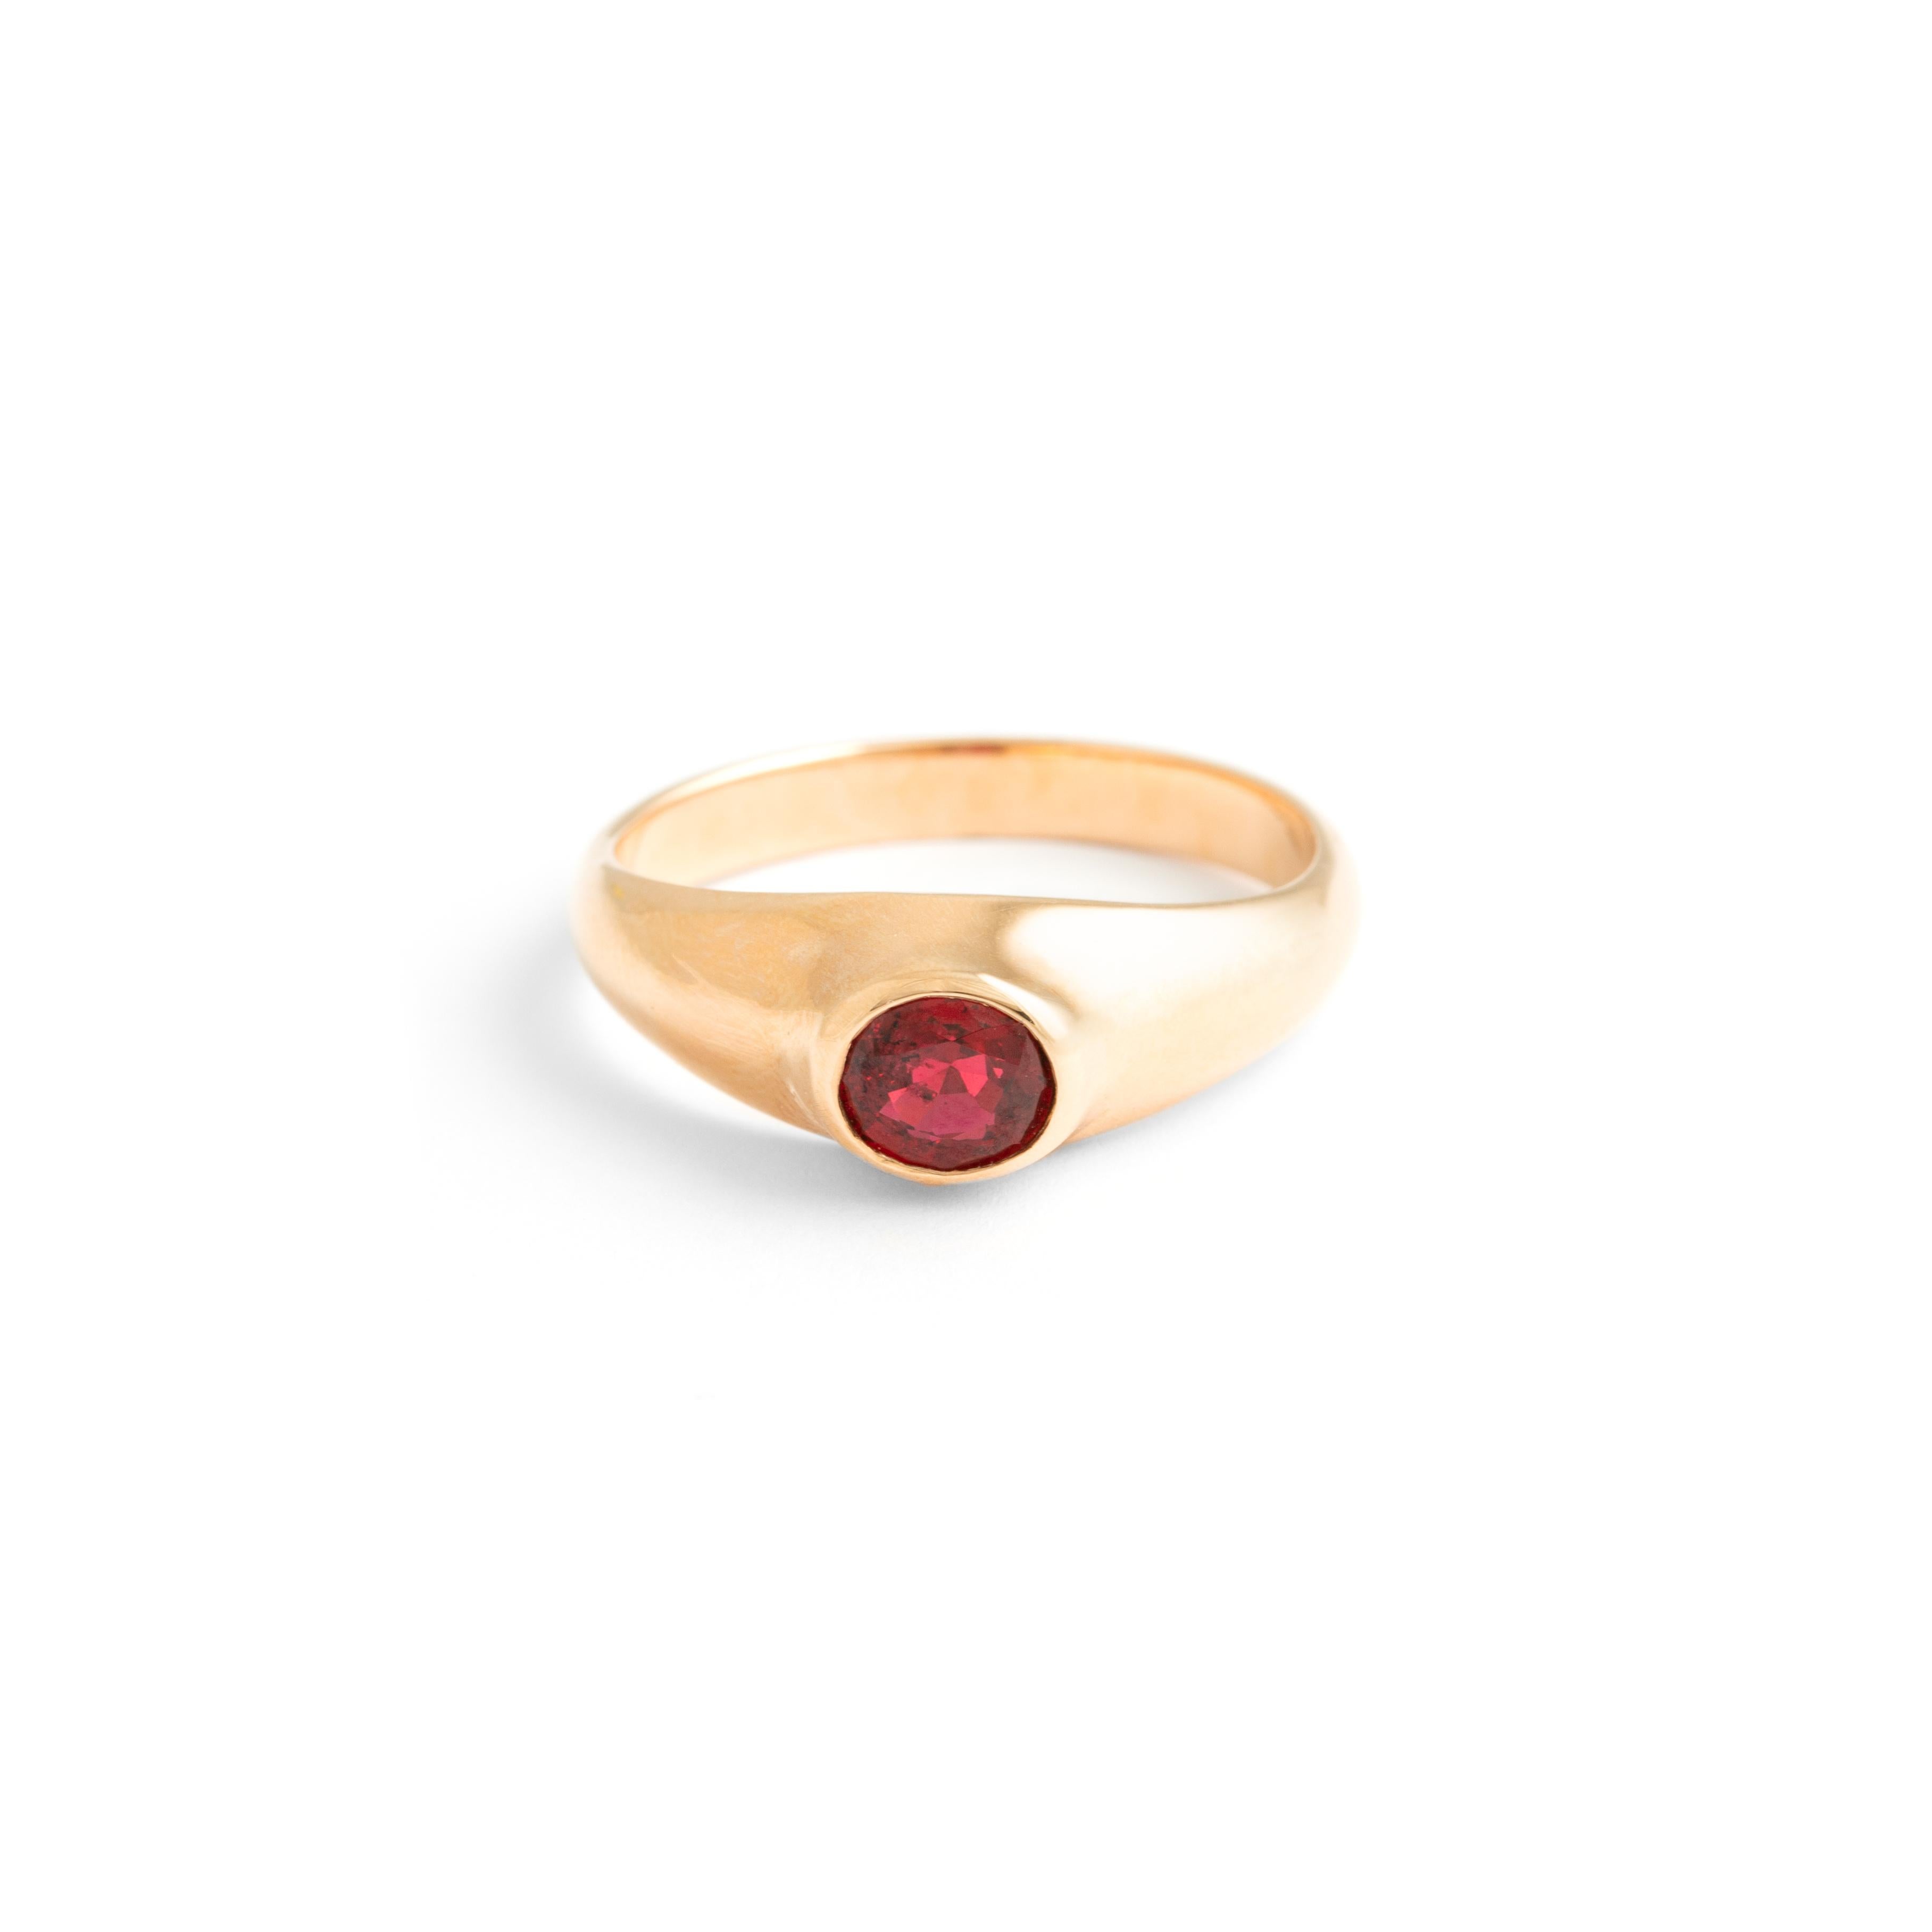 Red Spinel 1.14 carat, vibrant red, mounted on 7.95 gr. rose gold Ring.
Swiss laboratory certificate.
Gross weight: 8.13 grams.
Size: 67.